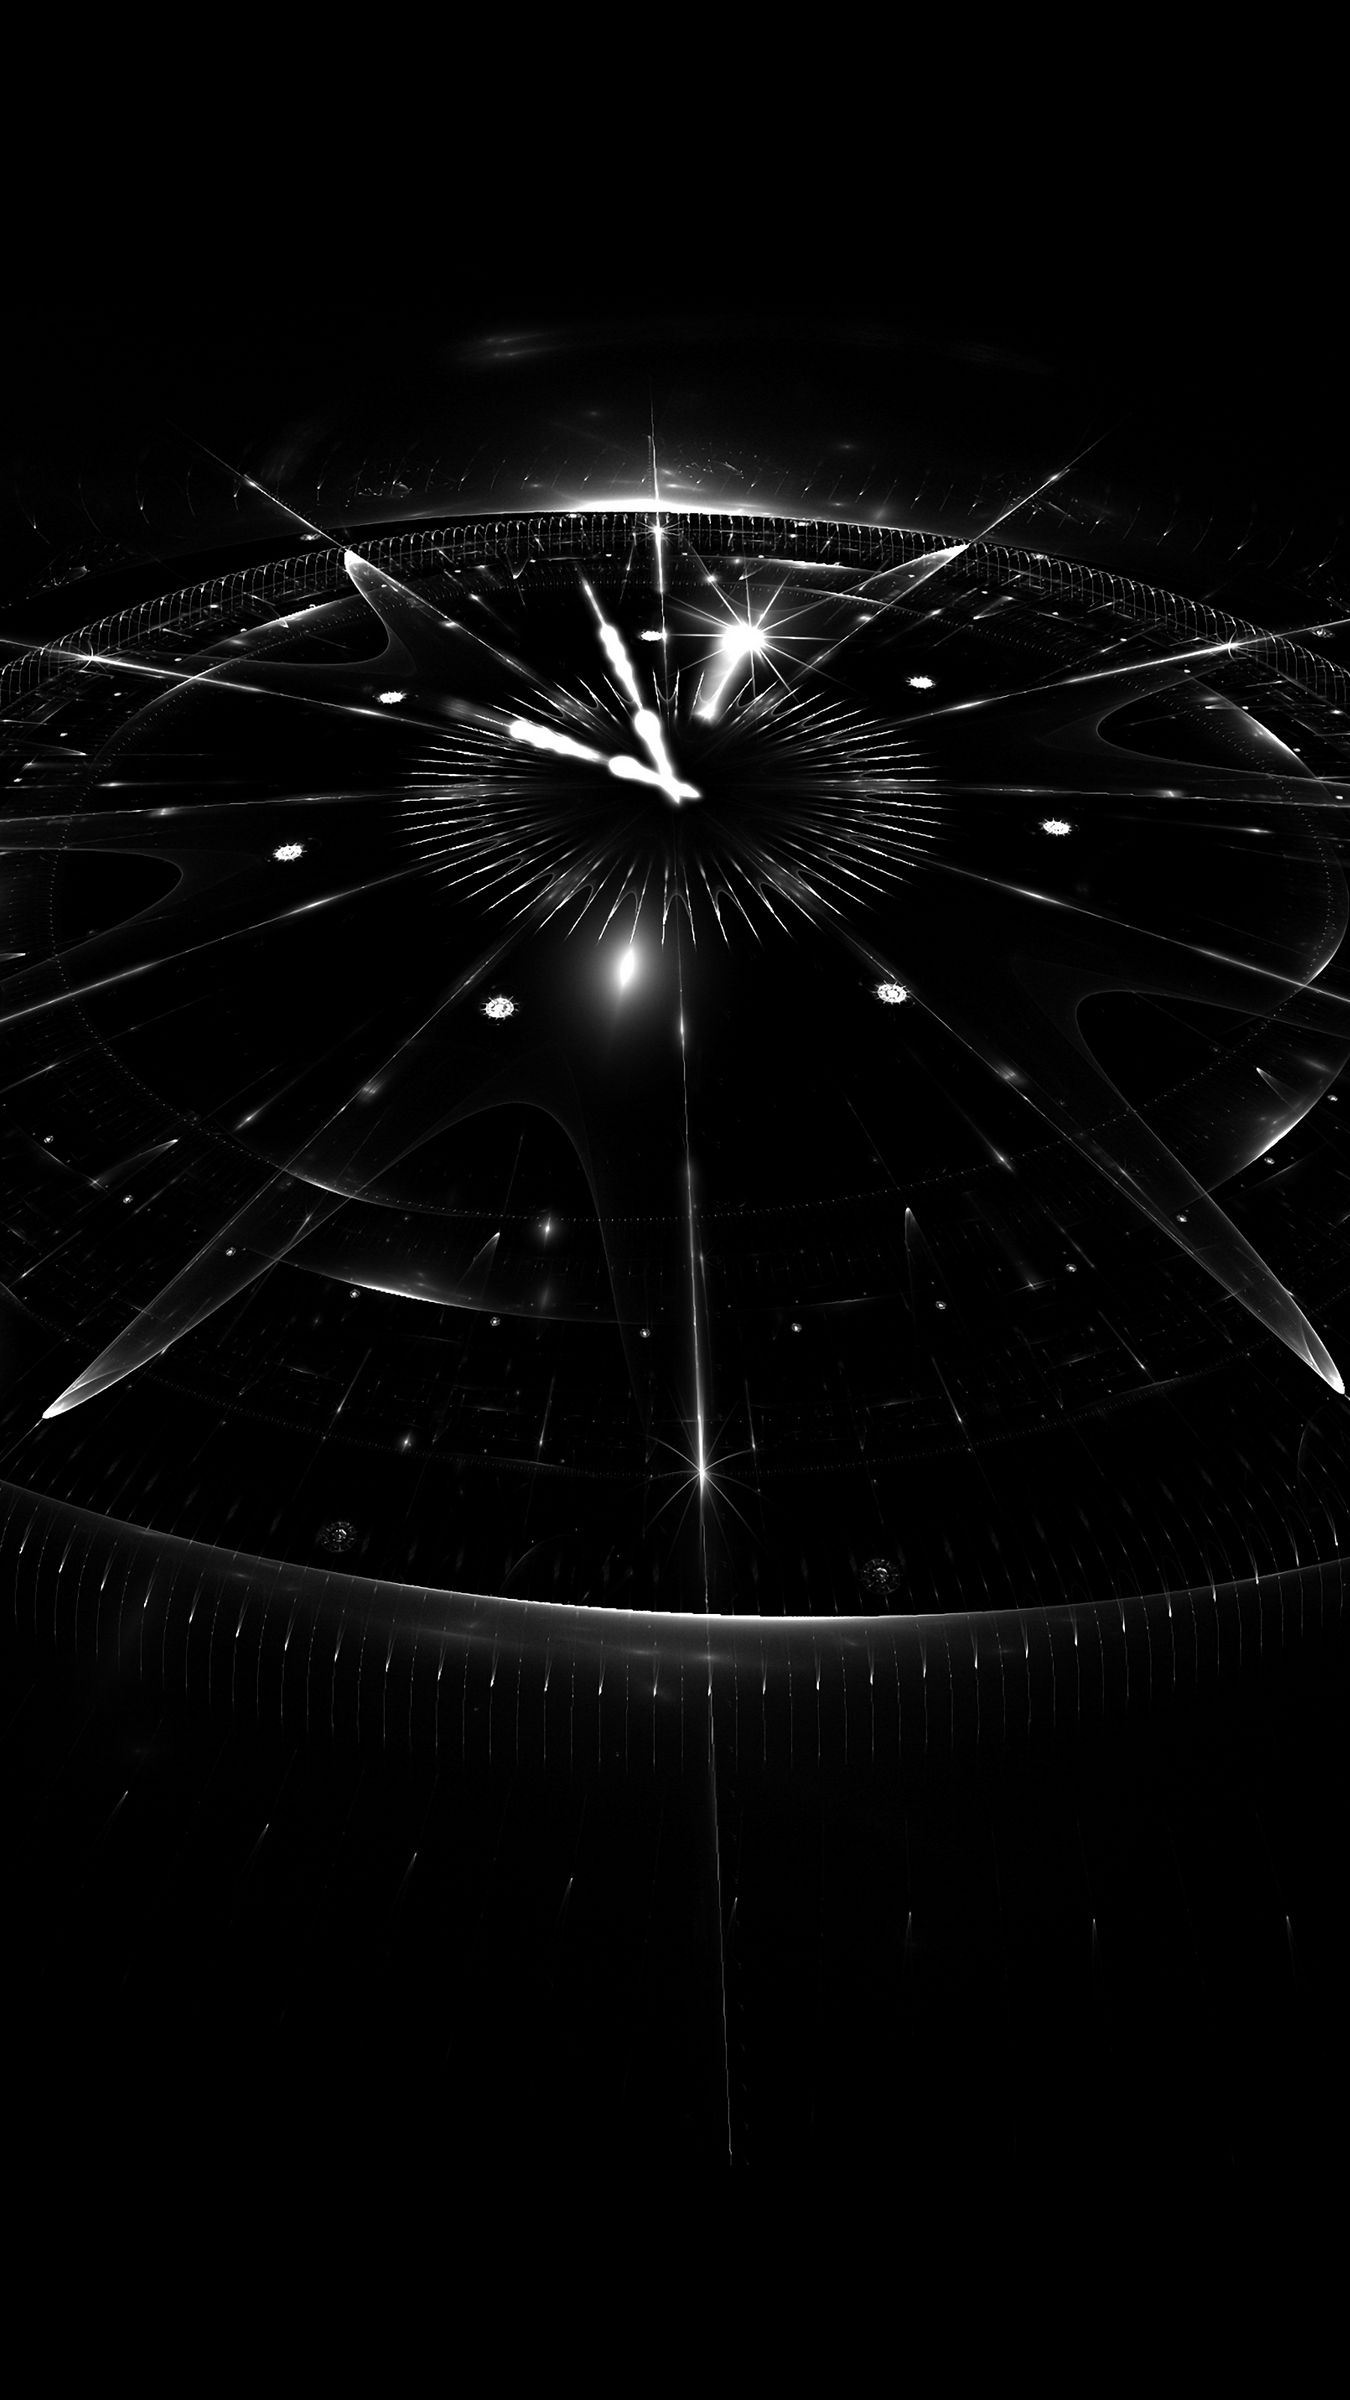 Pin by 000^000^000 on Time | Clock wallpaper, Iphone wallpaper clock,  Geometric wallpaper iphone